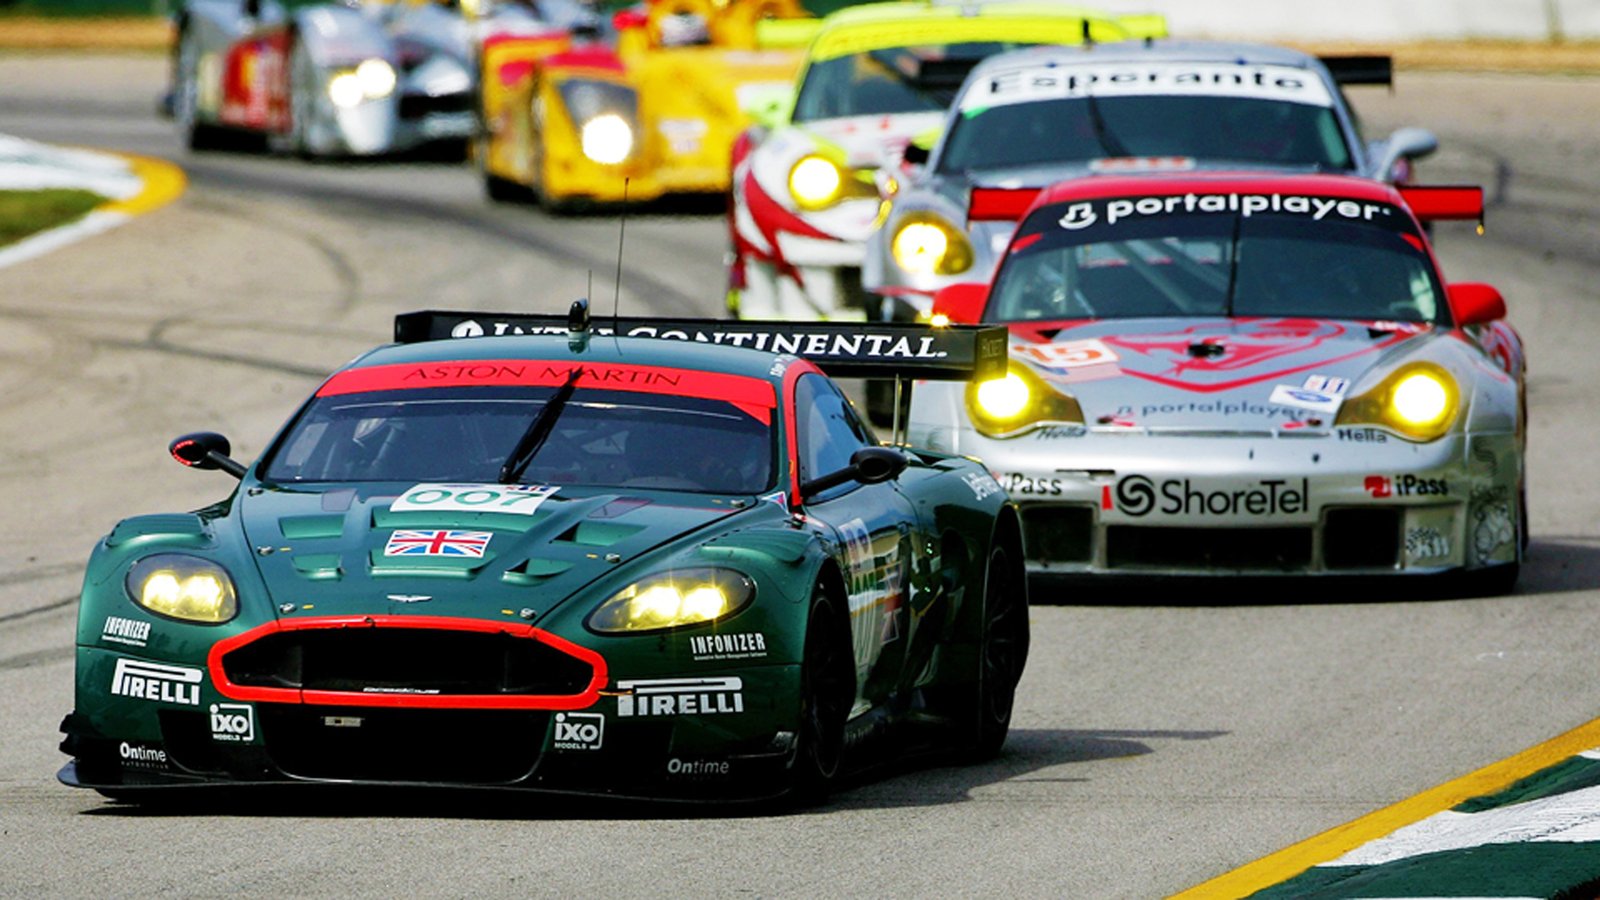 BRASELTON, GA - SEPTEMBER 30:  The #007 Aston Martin Racing DBR9 driven by Tomas Enge and Darrenn Turner during the American Le Mans Series Petit Le Mans on September 30, 2006 at Road Atlanta in Braselton, Georgia.  (Photo by Darrell Ingham/Getty Images)